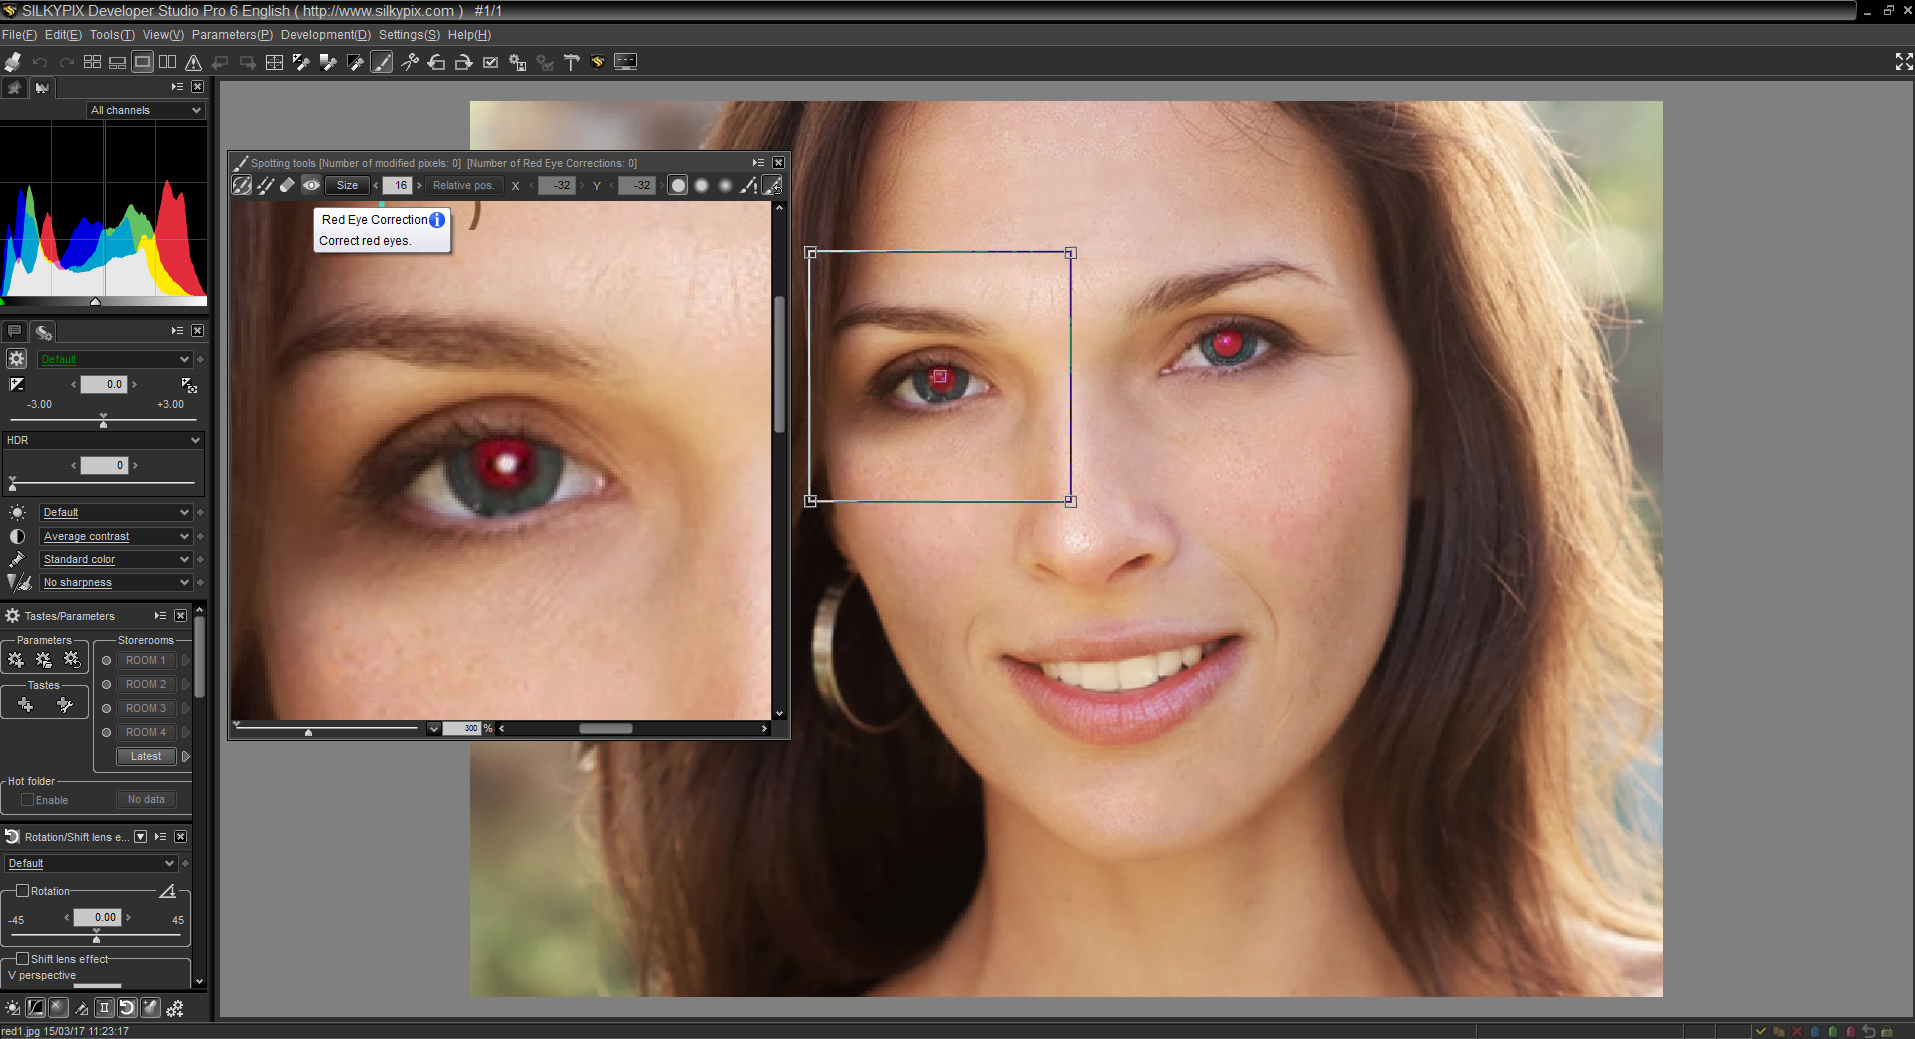 Select the Red Eye Correction Tool